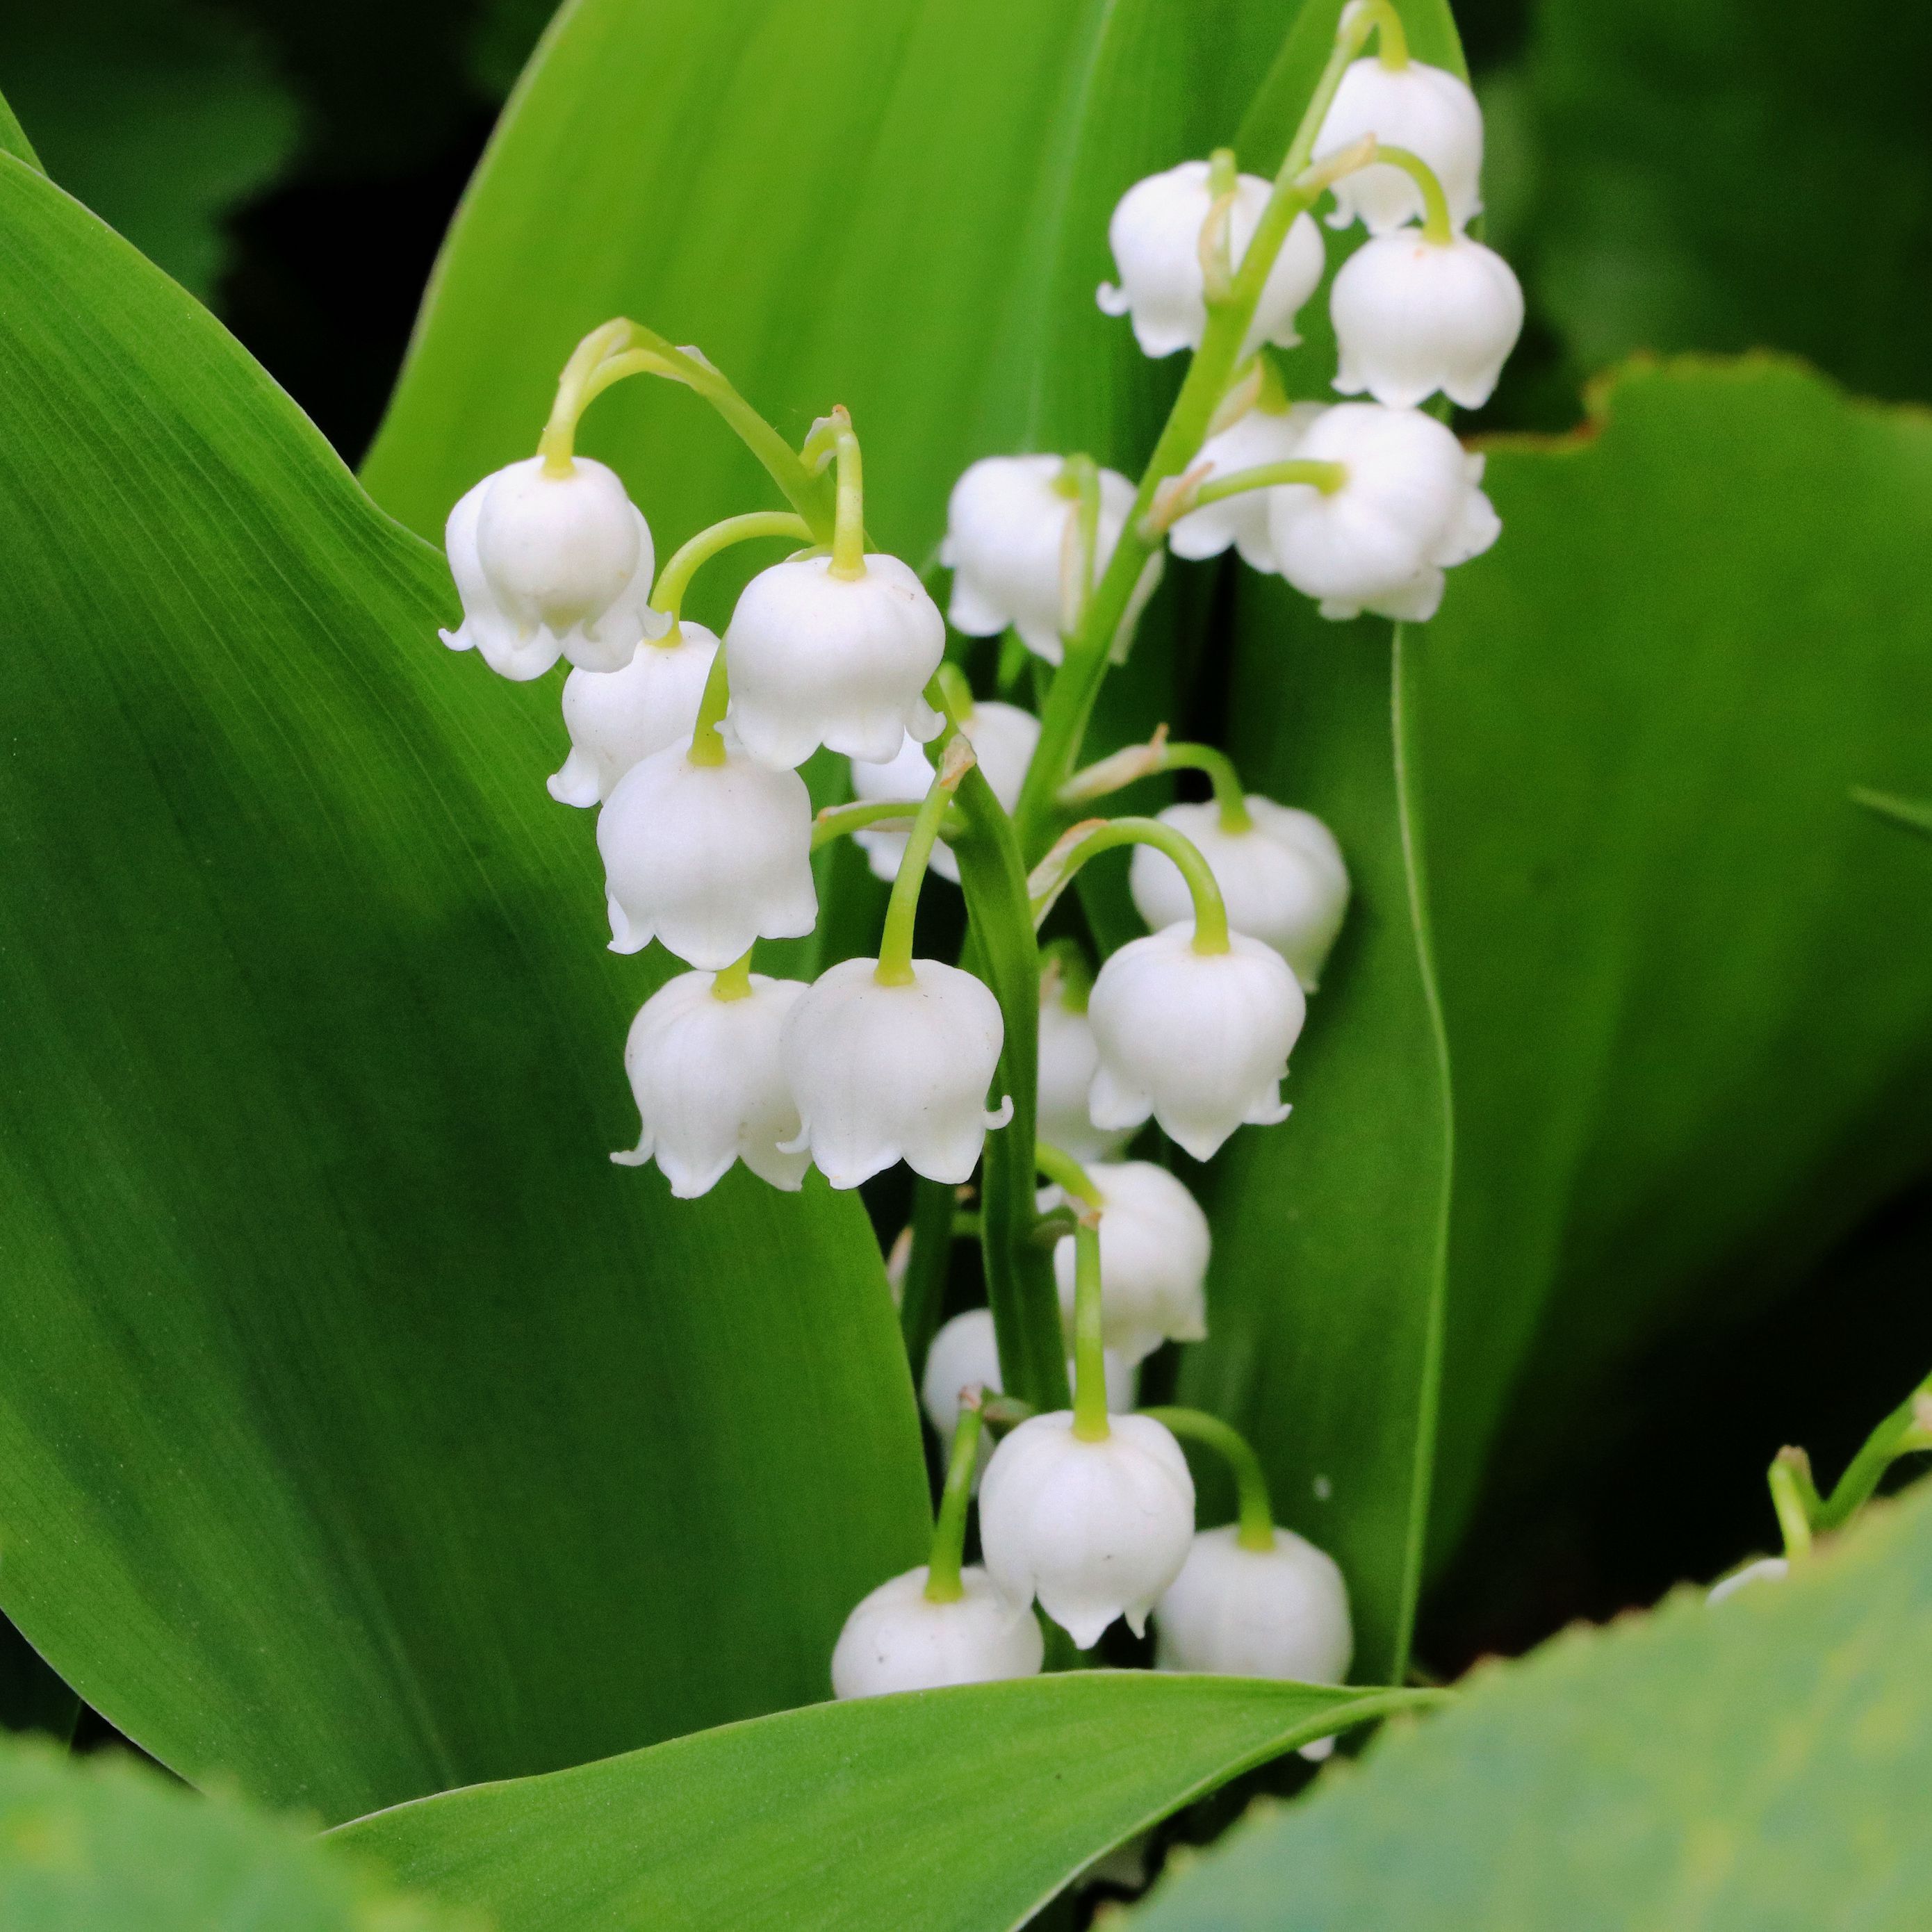 Download wallpaper 2780x2780 lily of the valley, flowers, leaves